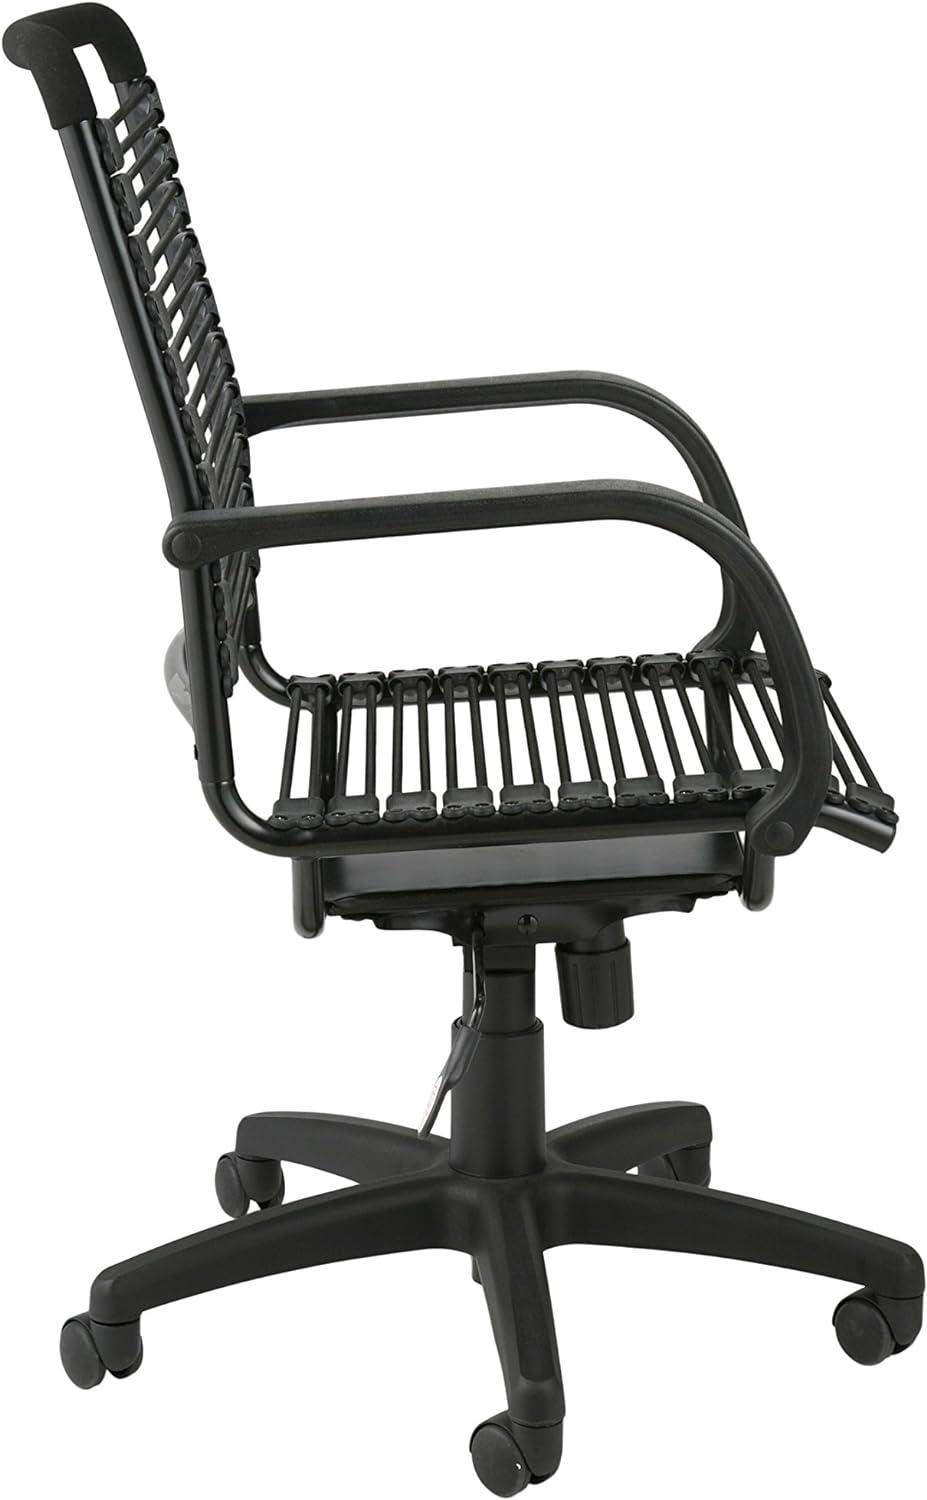 Graphite Black Metal Swivel Bungee Office Chair with High Back